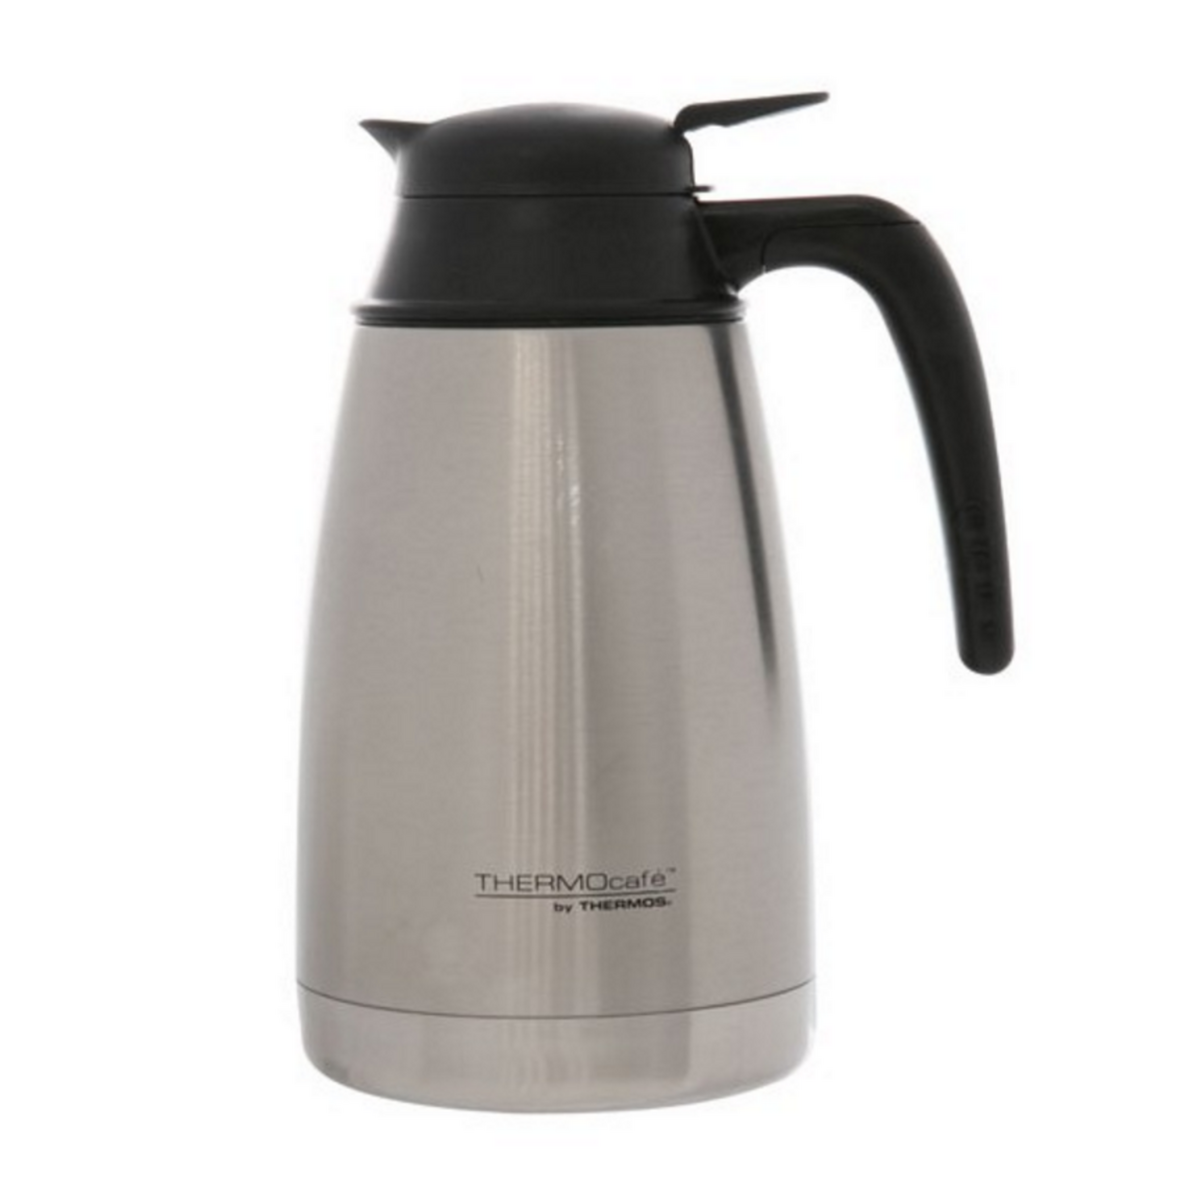 thermocafe by thermos Carafe isolante 1.5l inox - 121547